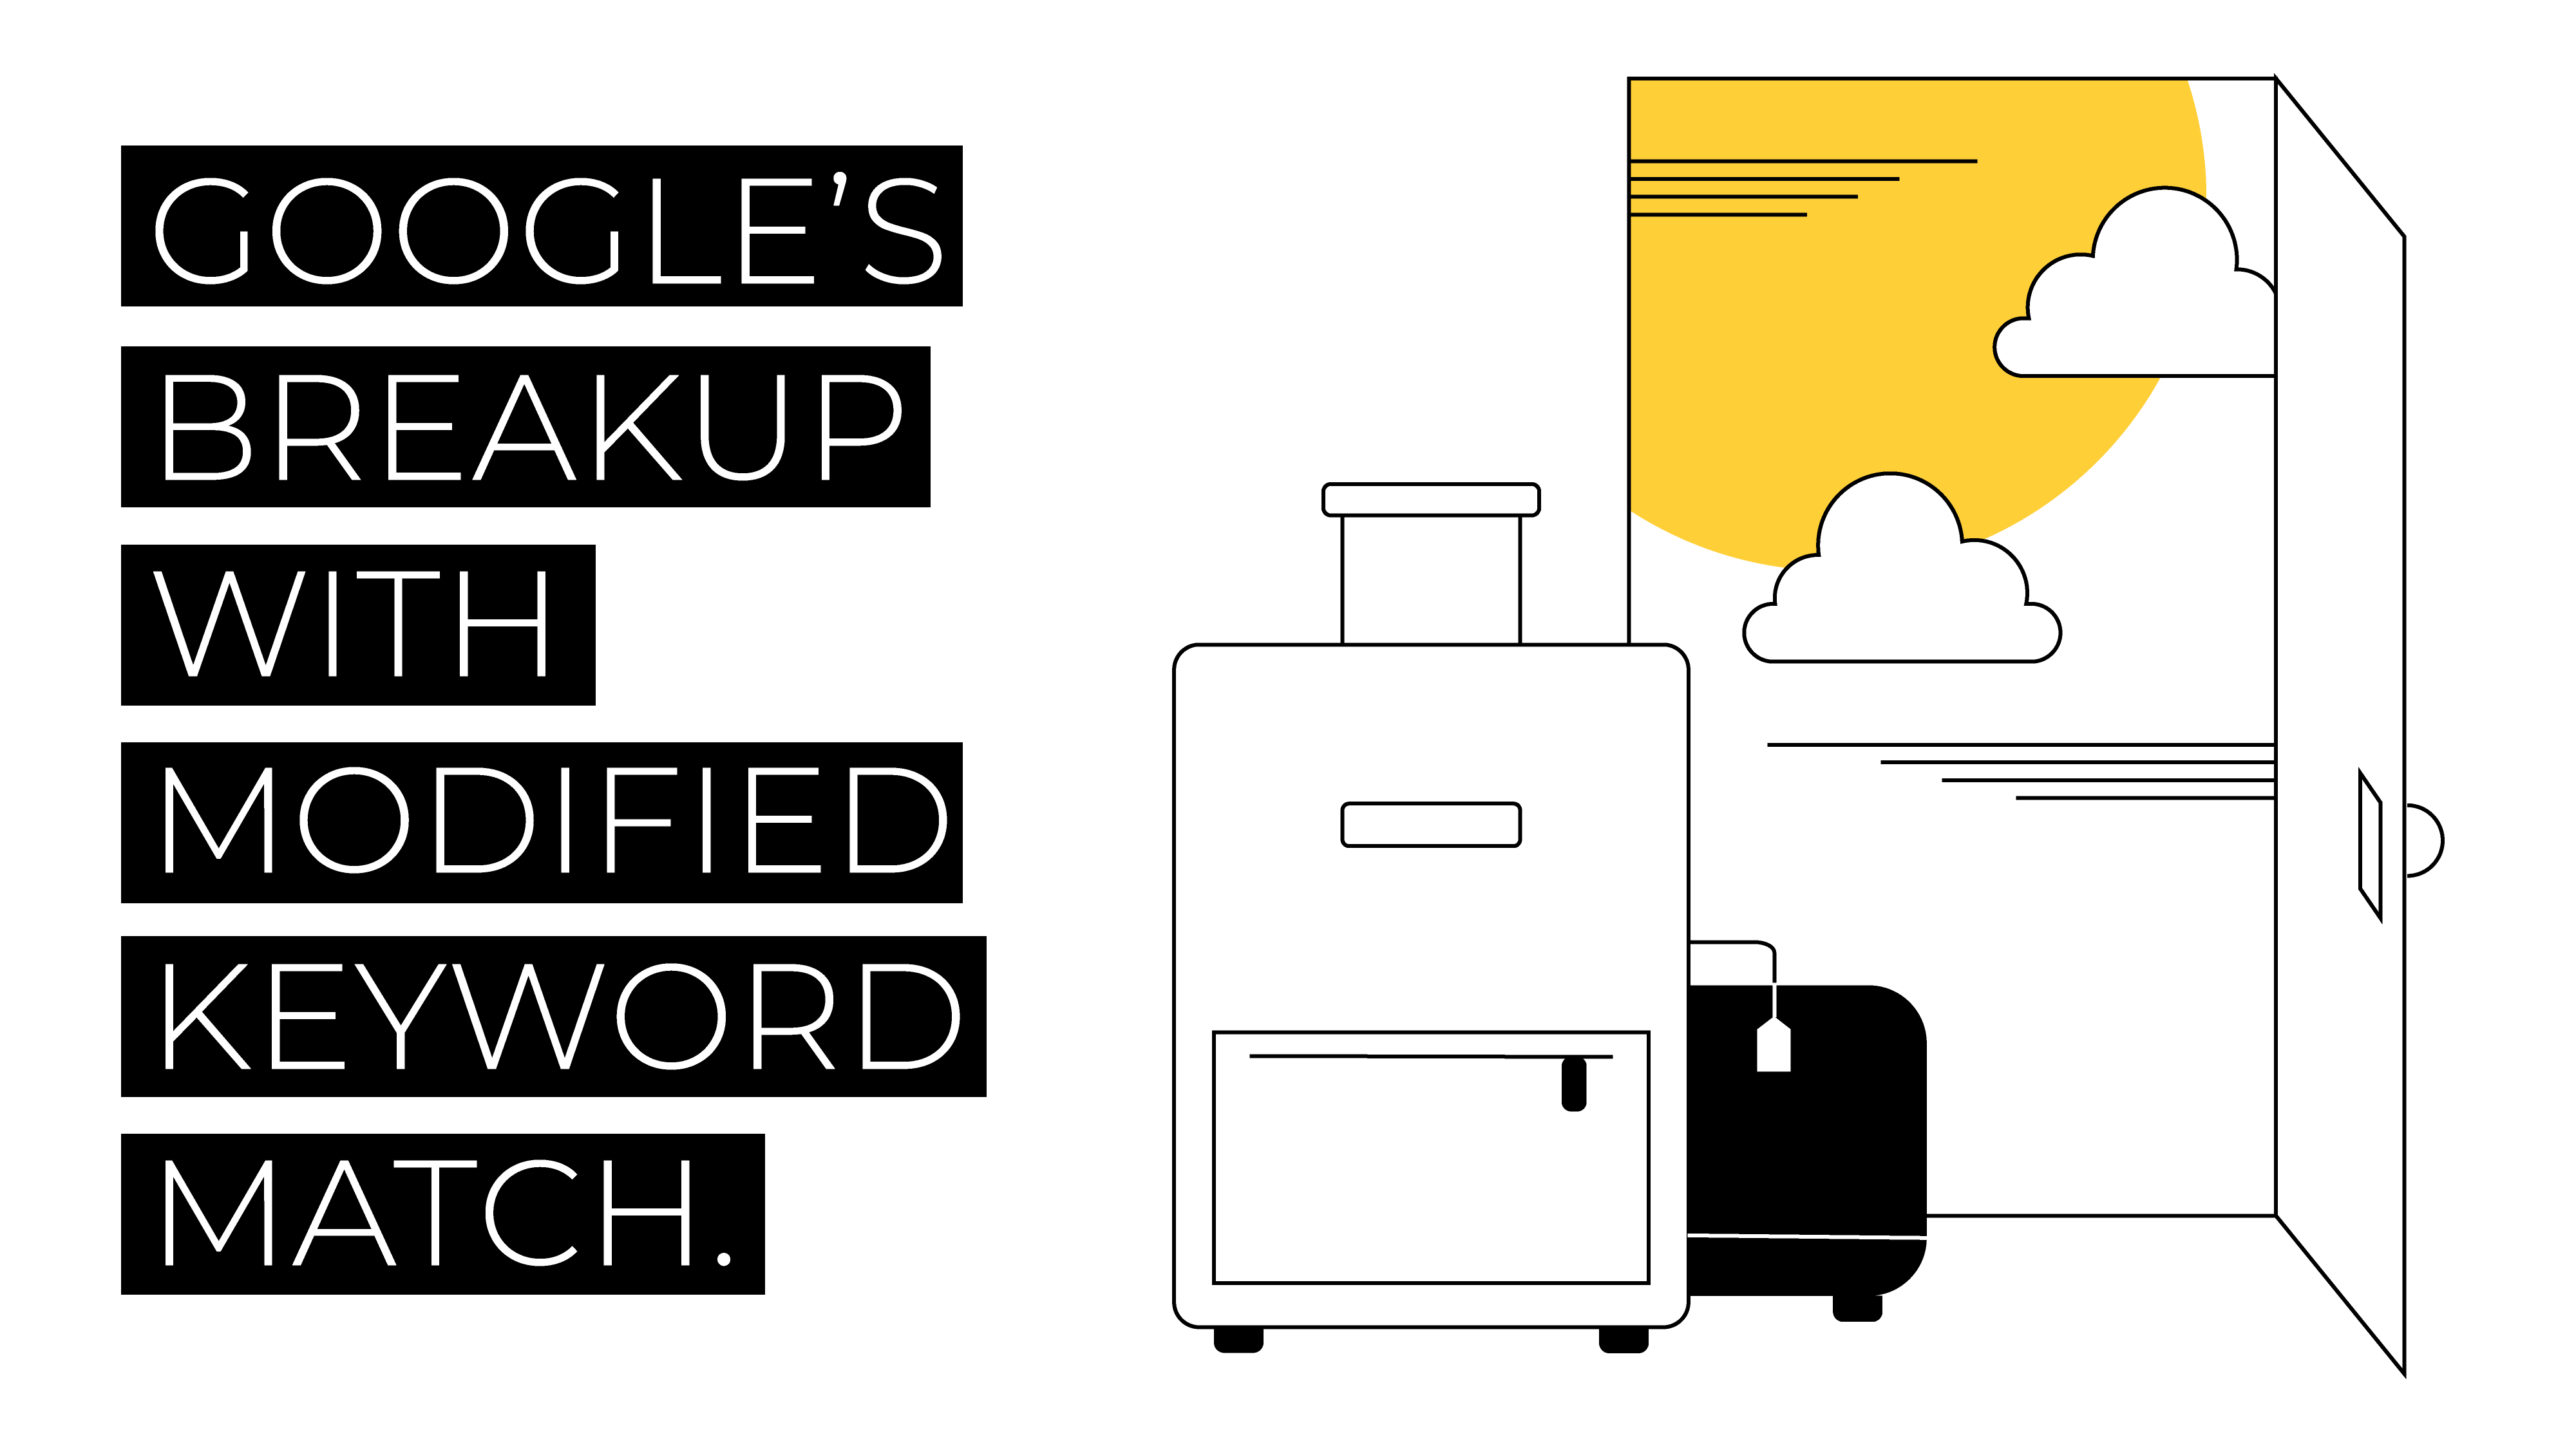 Google’s Breakup with Modified Keyword Match